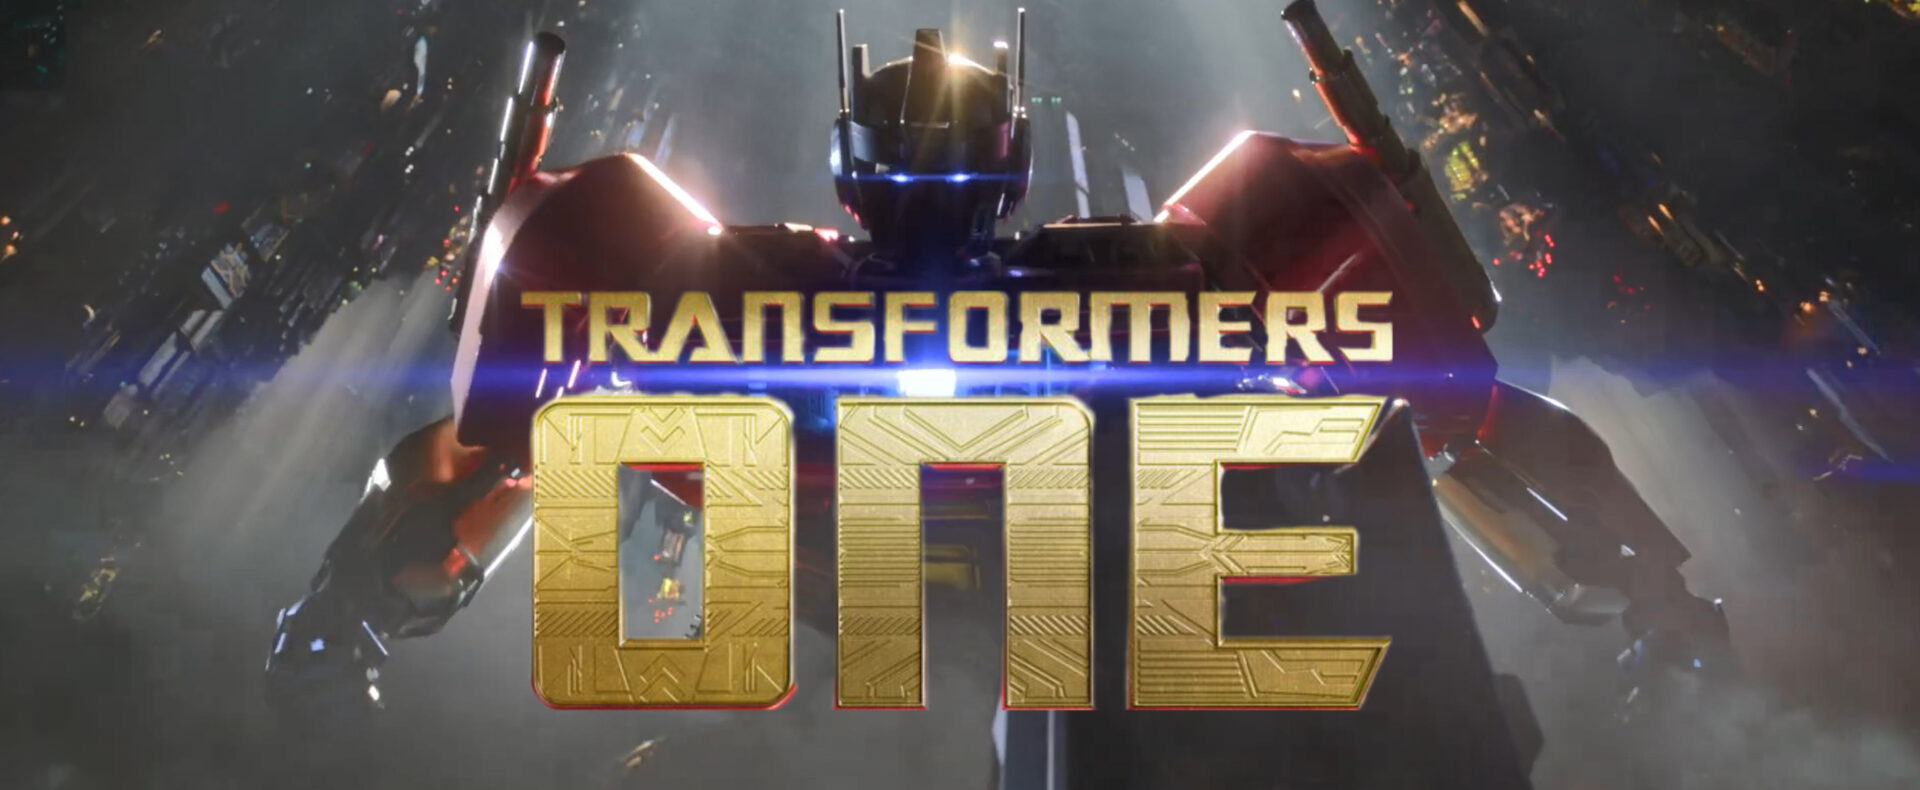 transformers one theatrical trailer banner